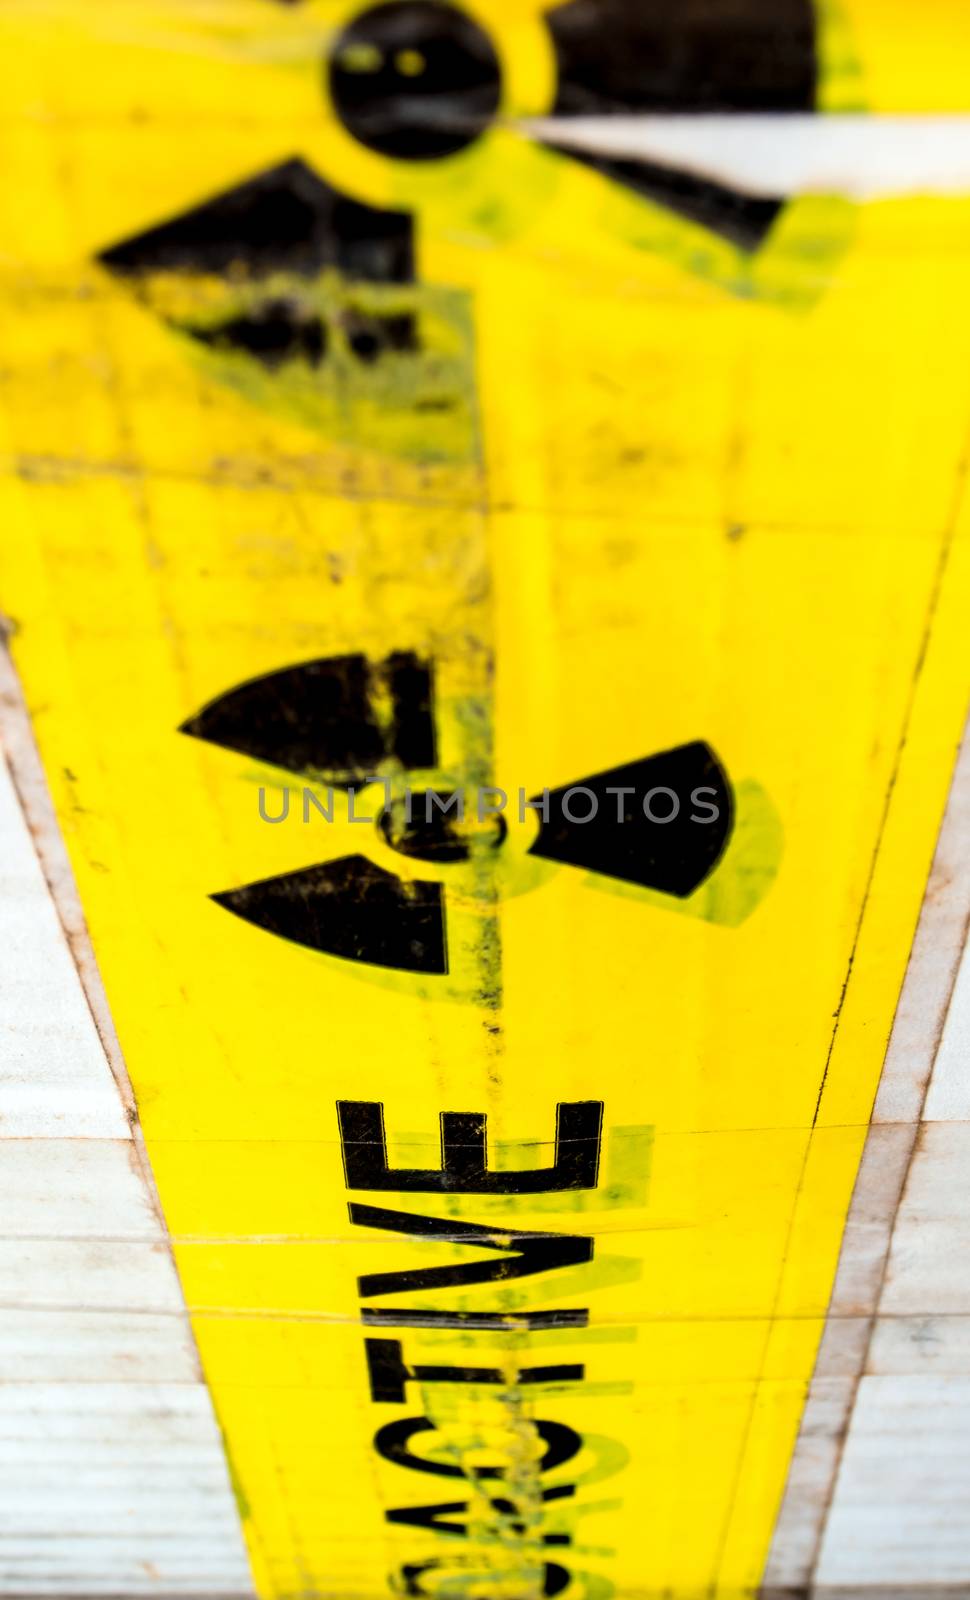 Radioactive material warning sign at the transportation paper package